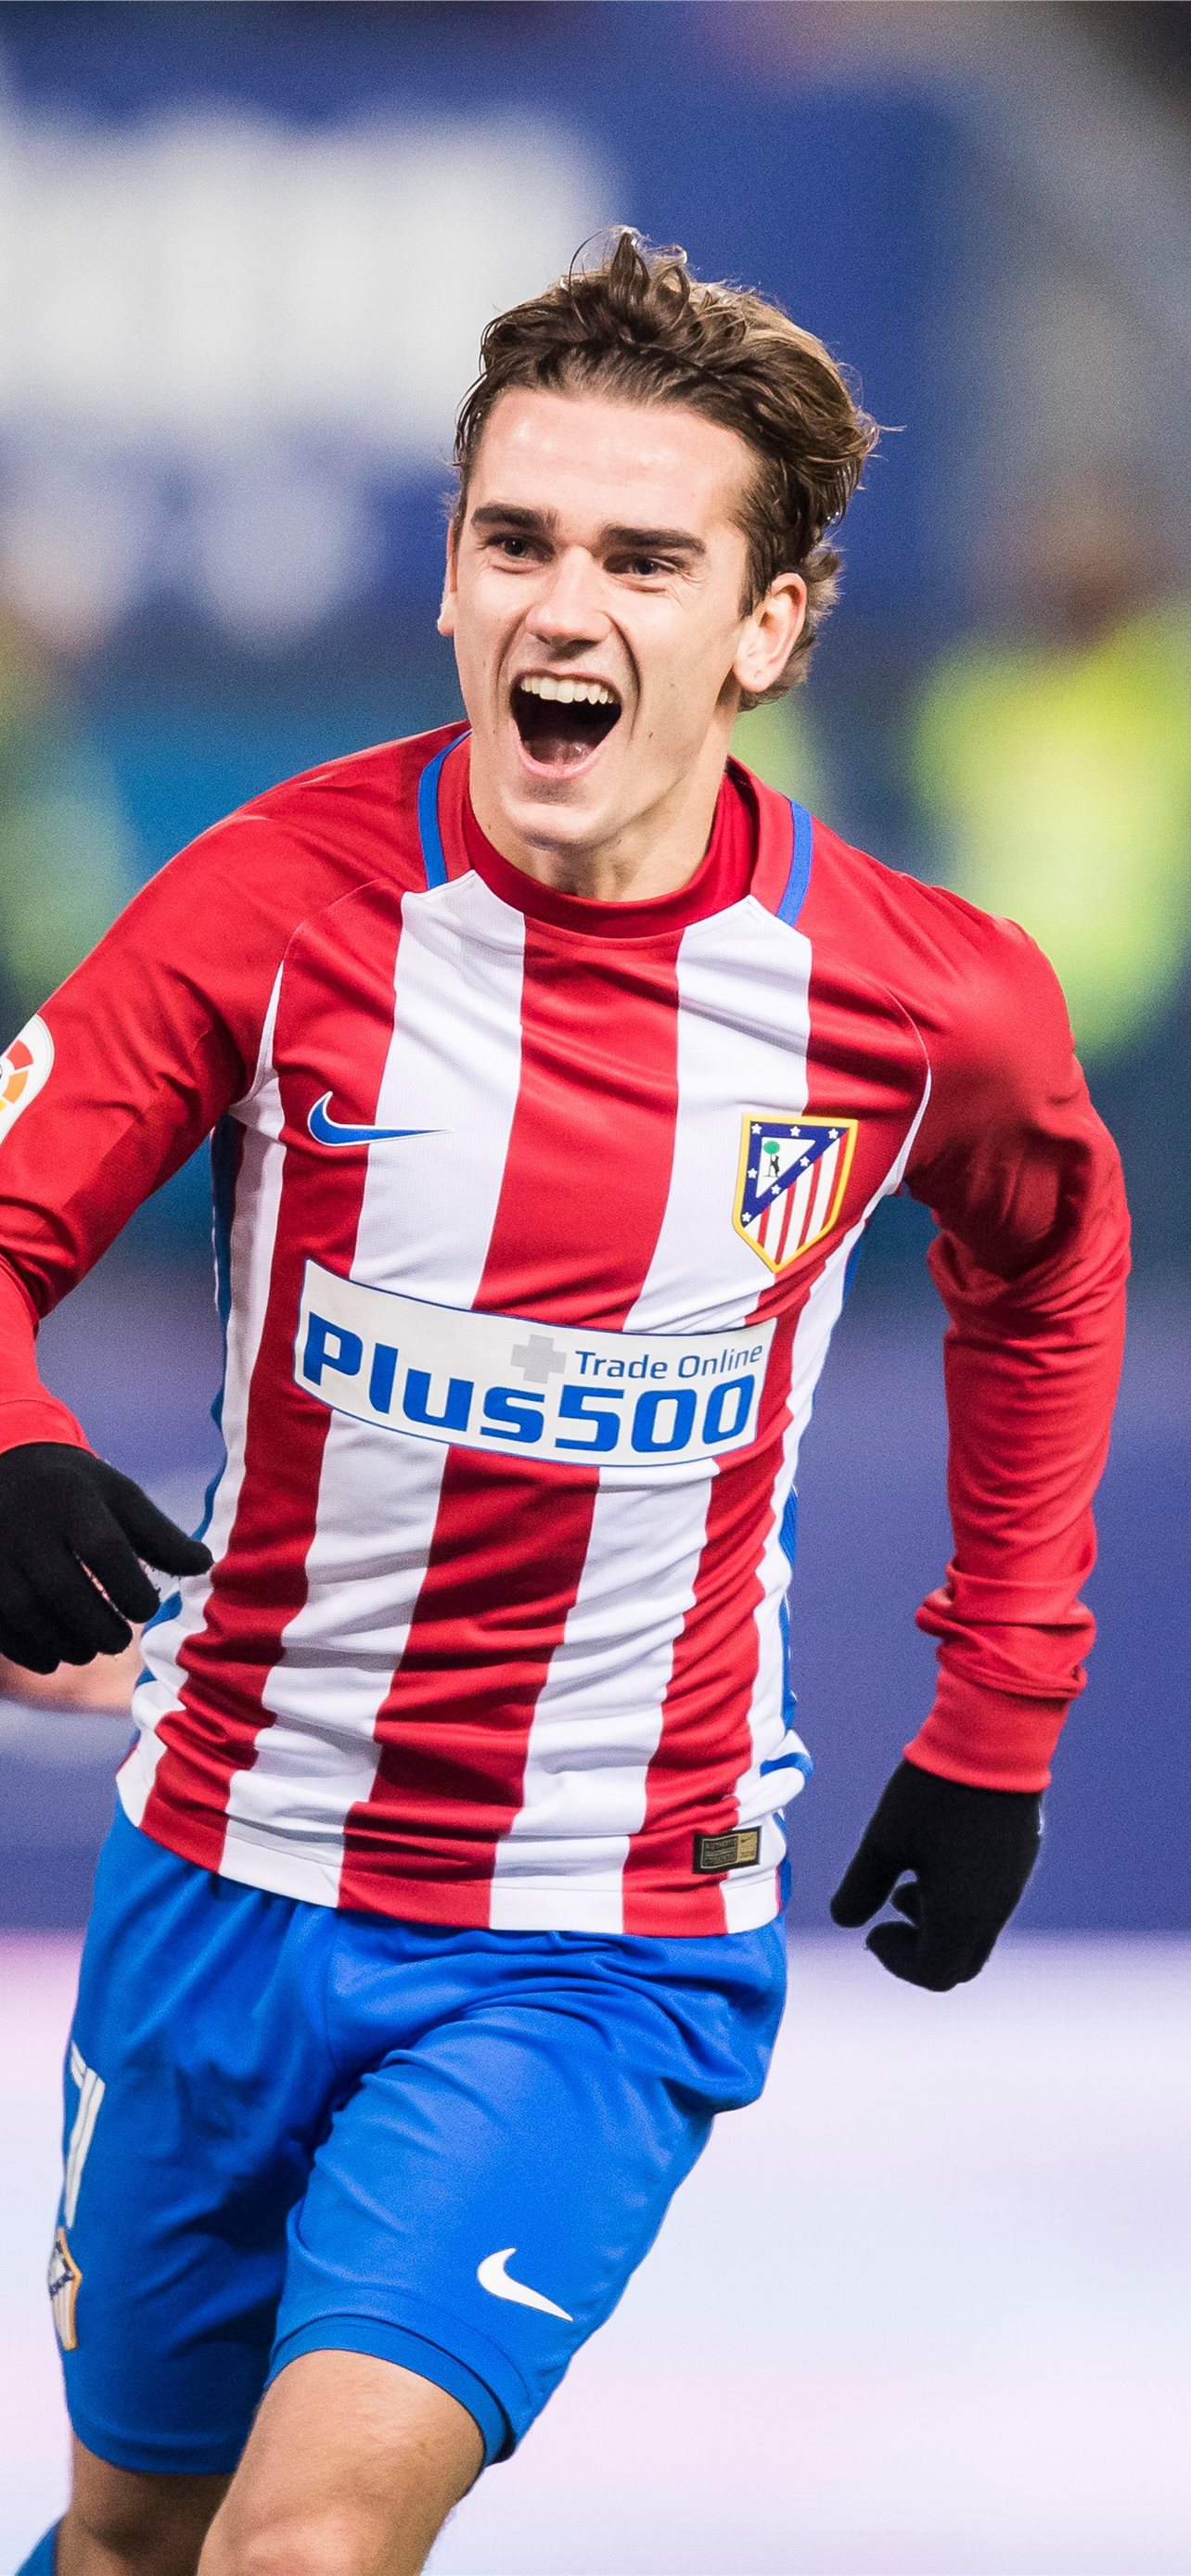 Download free HD wallpaper from above link sports  AntoineGriezmannWallpaper AntoineGriezmannWallpaperIphone Antoi   Antoine griezmann Griezmann Mens tshirts